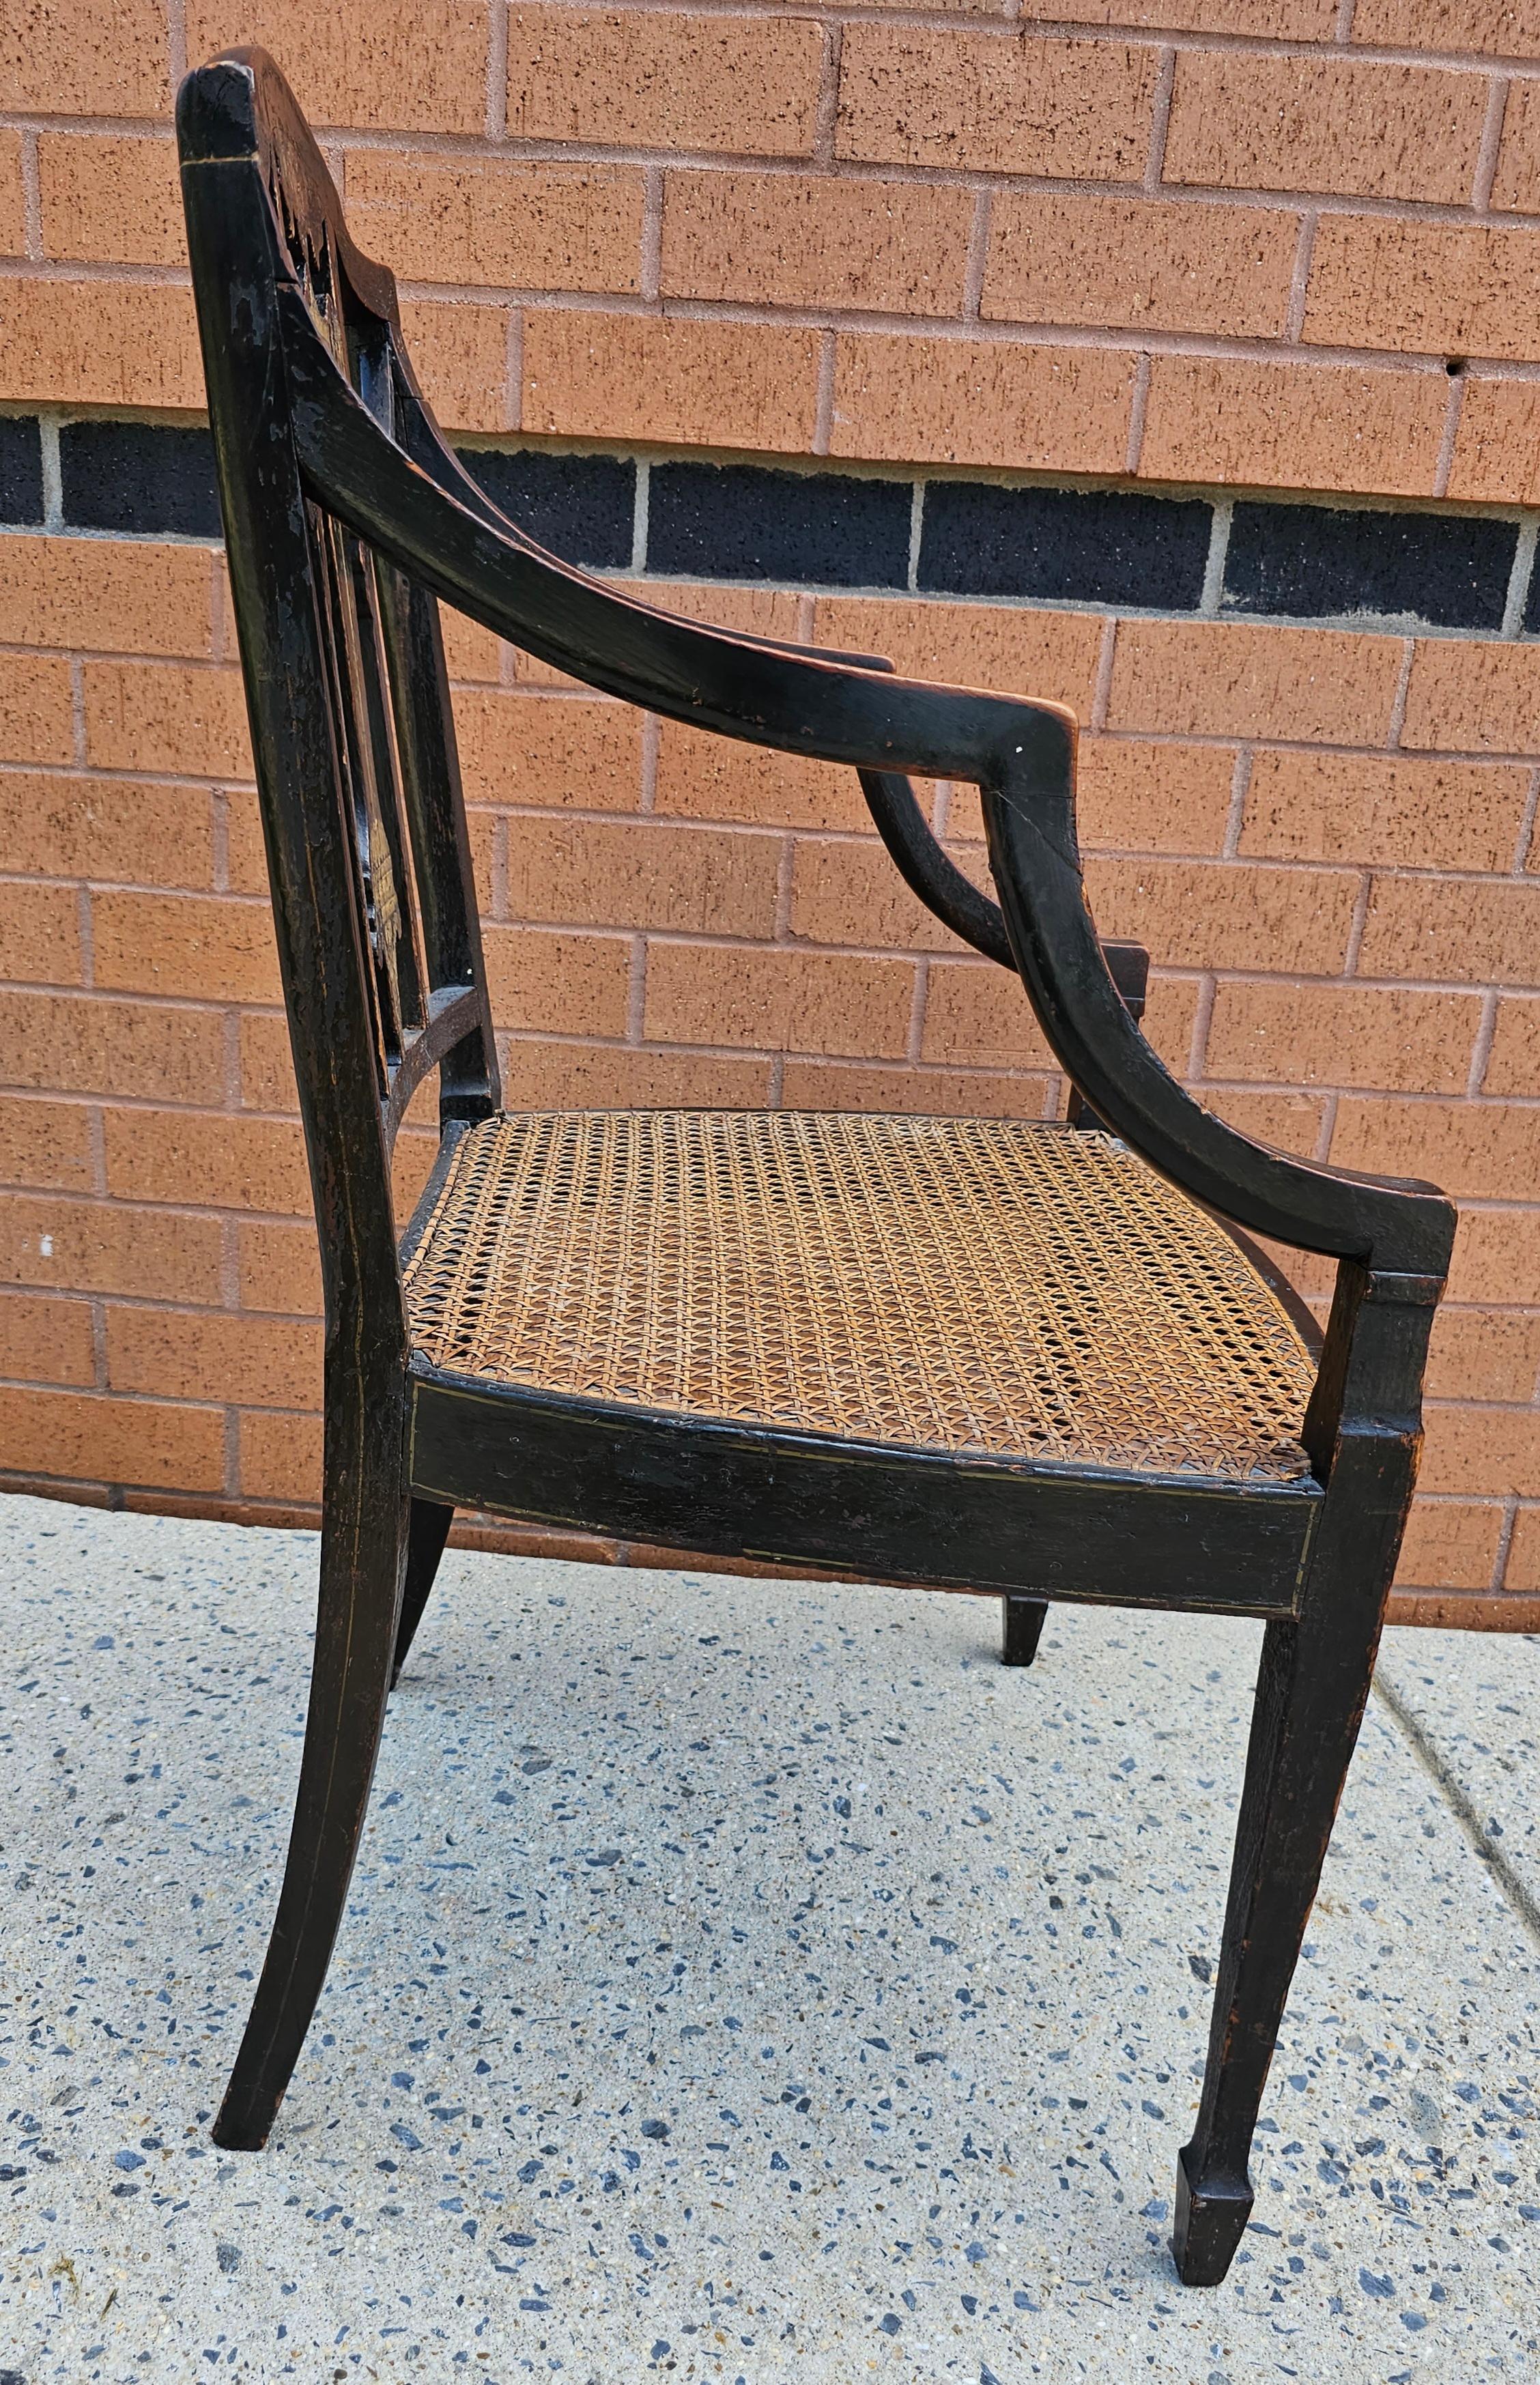 18th Century Ebonized and Inlays Decorated Cane Seat Armchair In Good Condition For Sale In Germantown, MD